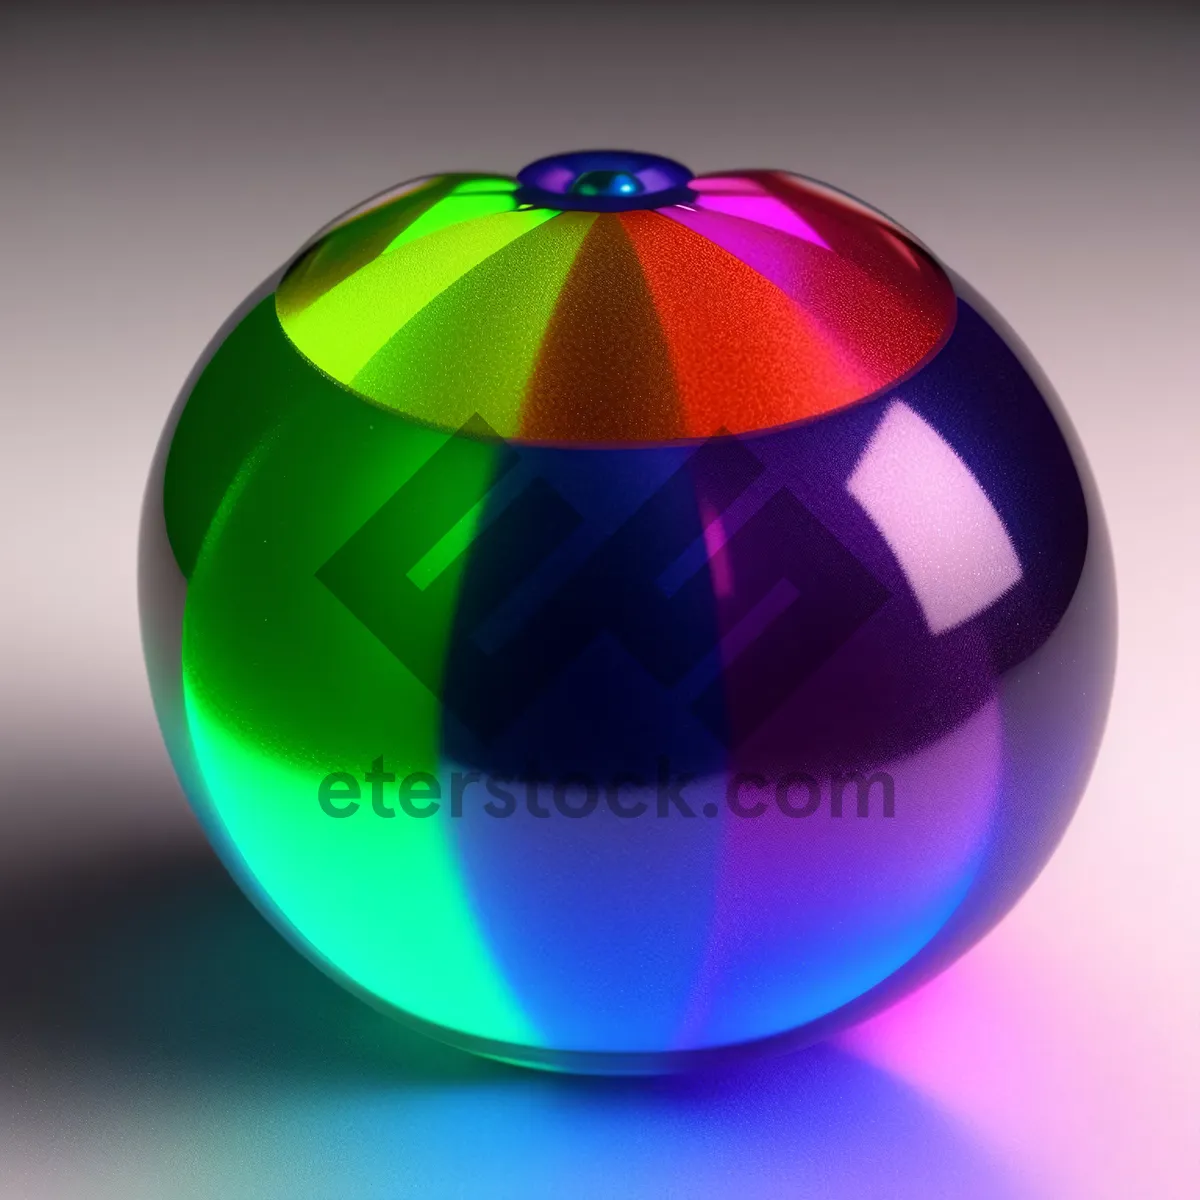 Picture of Shiny Earth Globe Icon with Glass Reflection